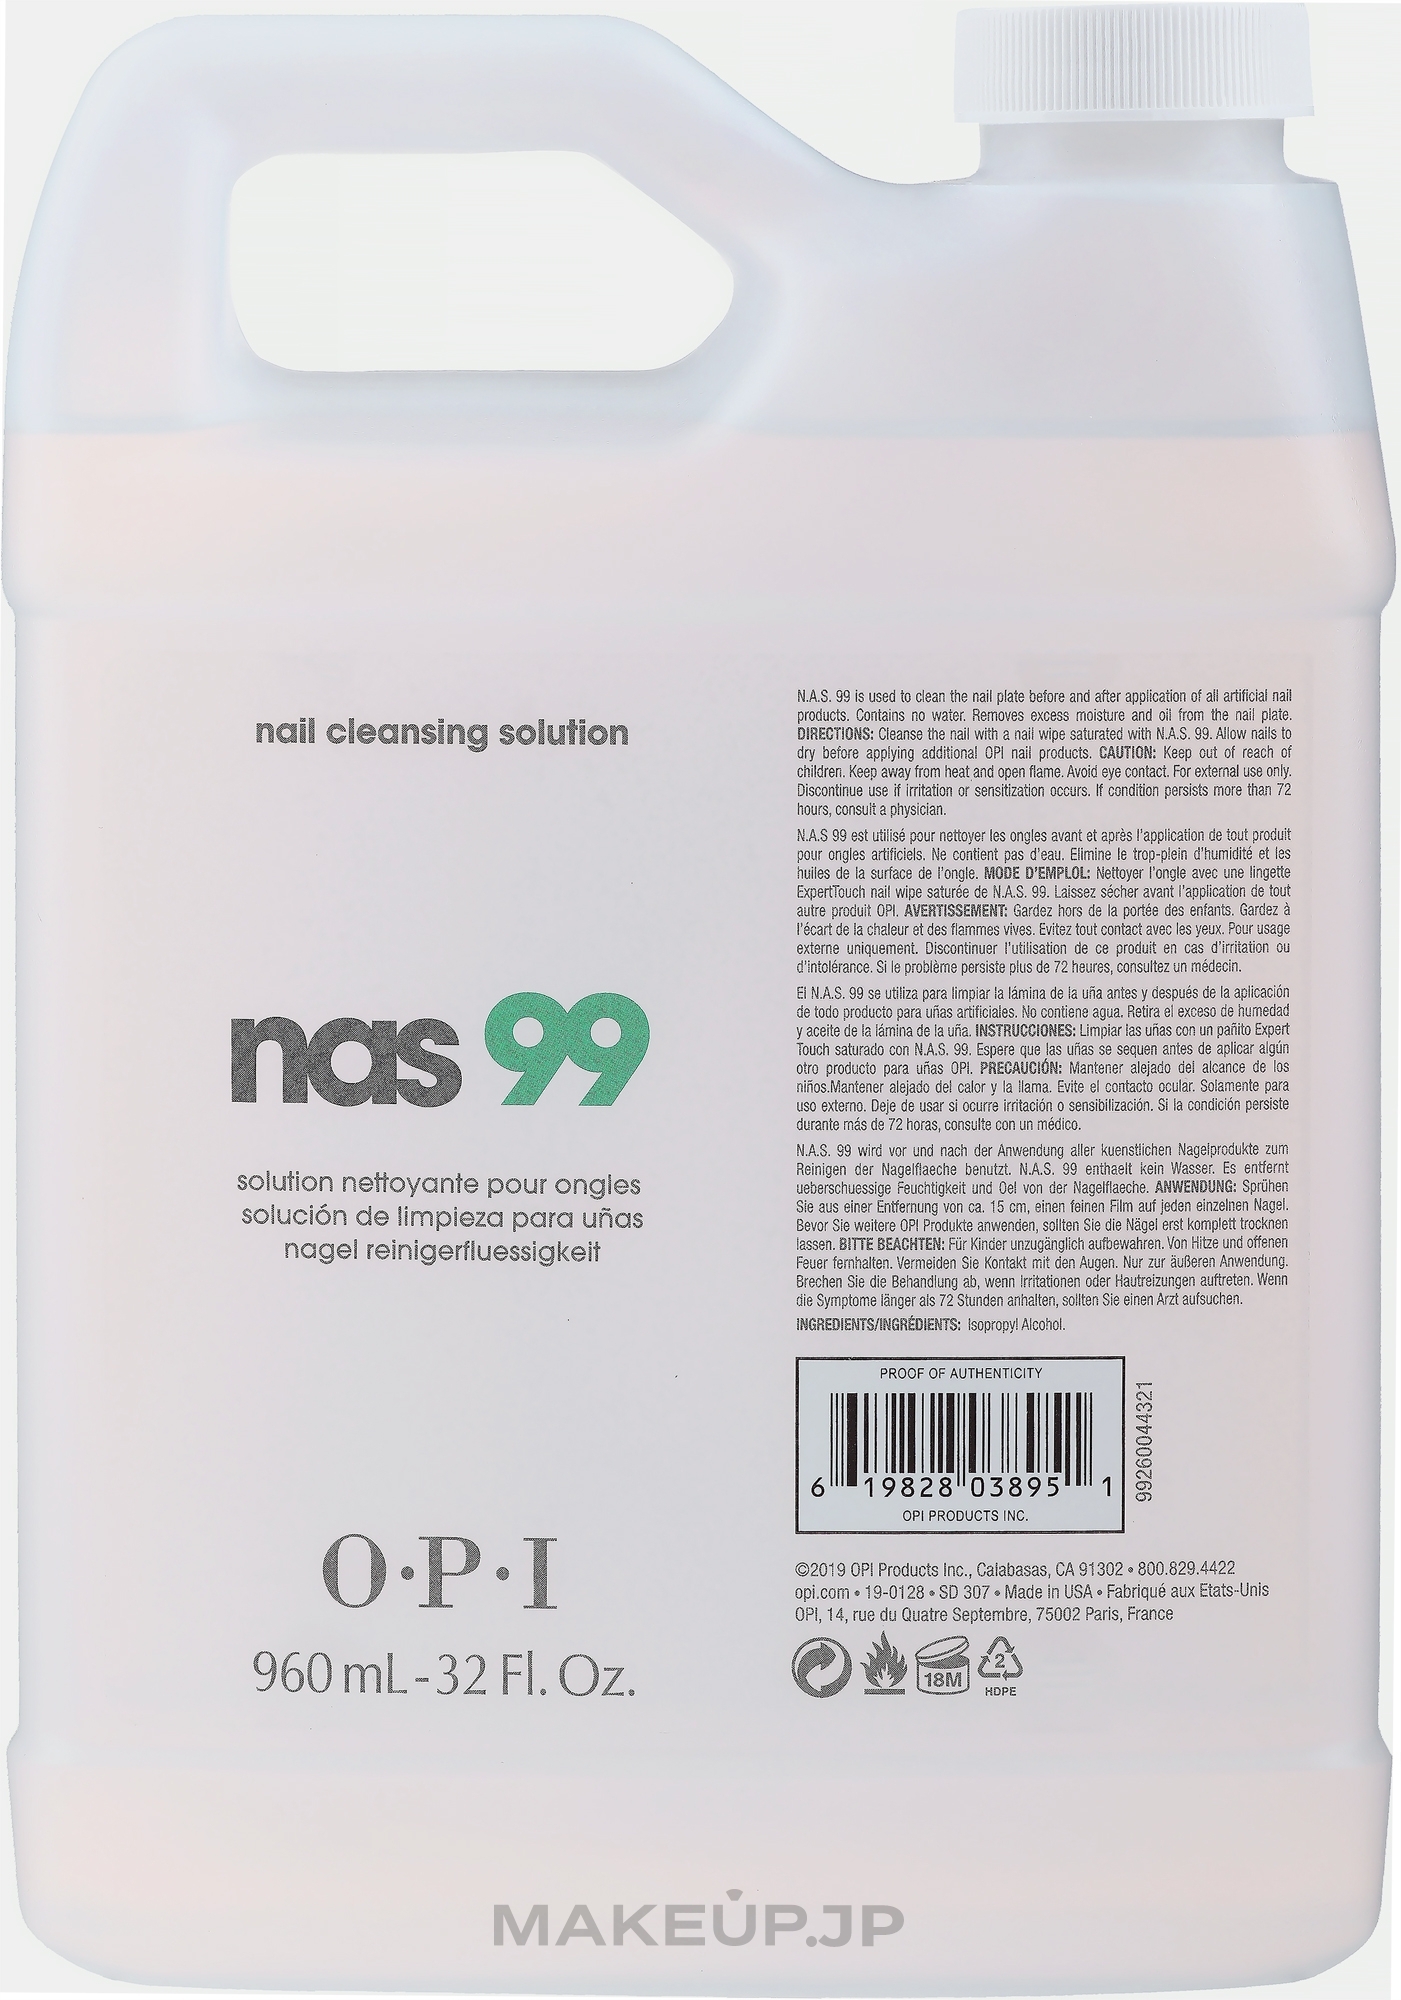 Nail Cleansing Solution with Thymol - OPI. N.A.S. 99 Nail Antiseptic — photo 960 ml